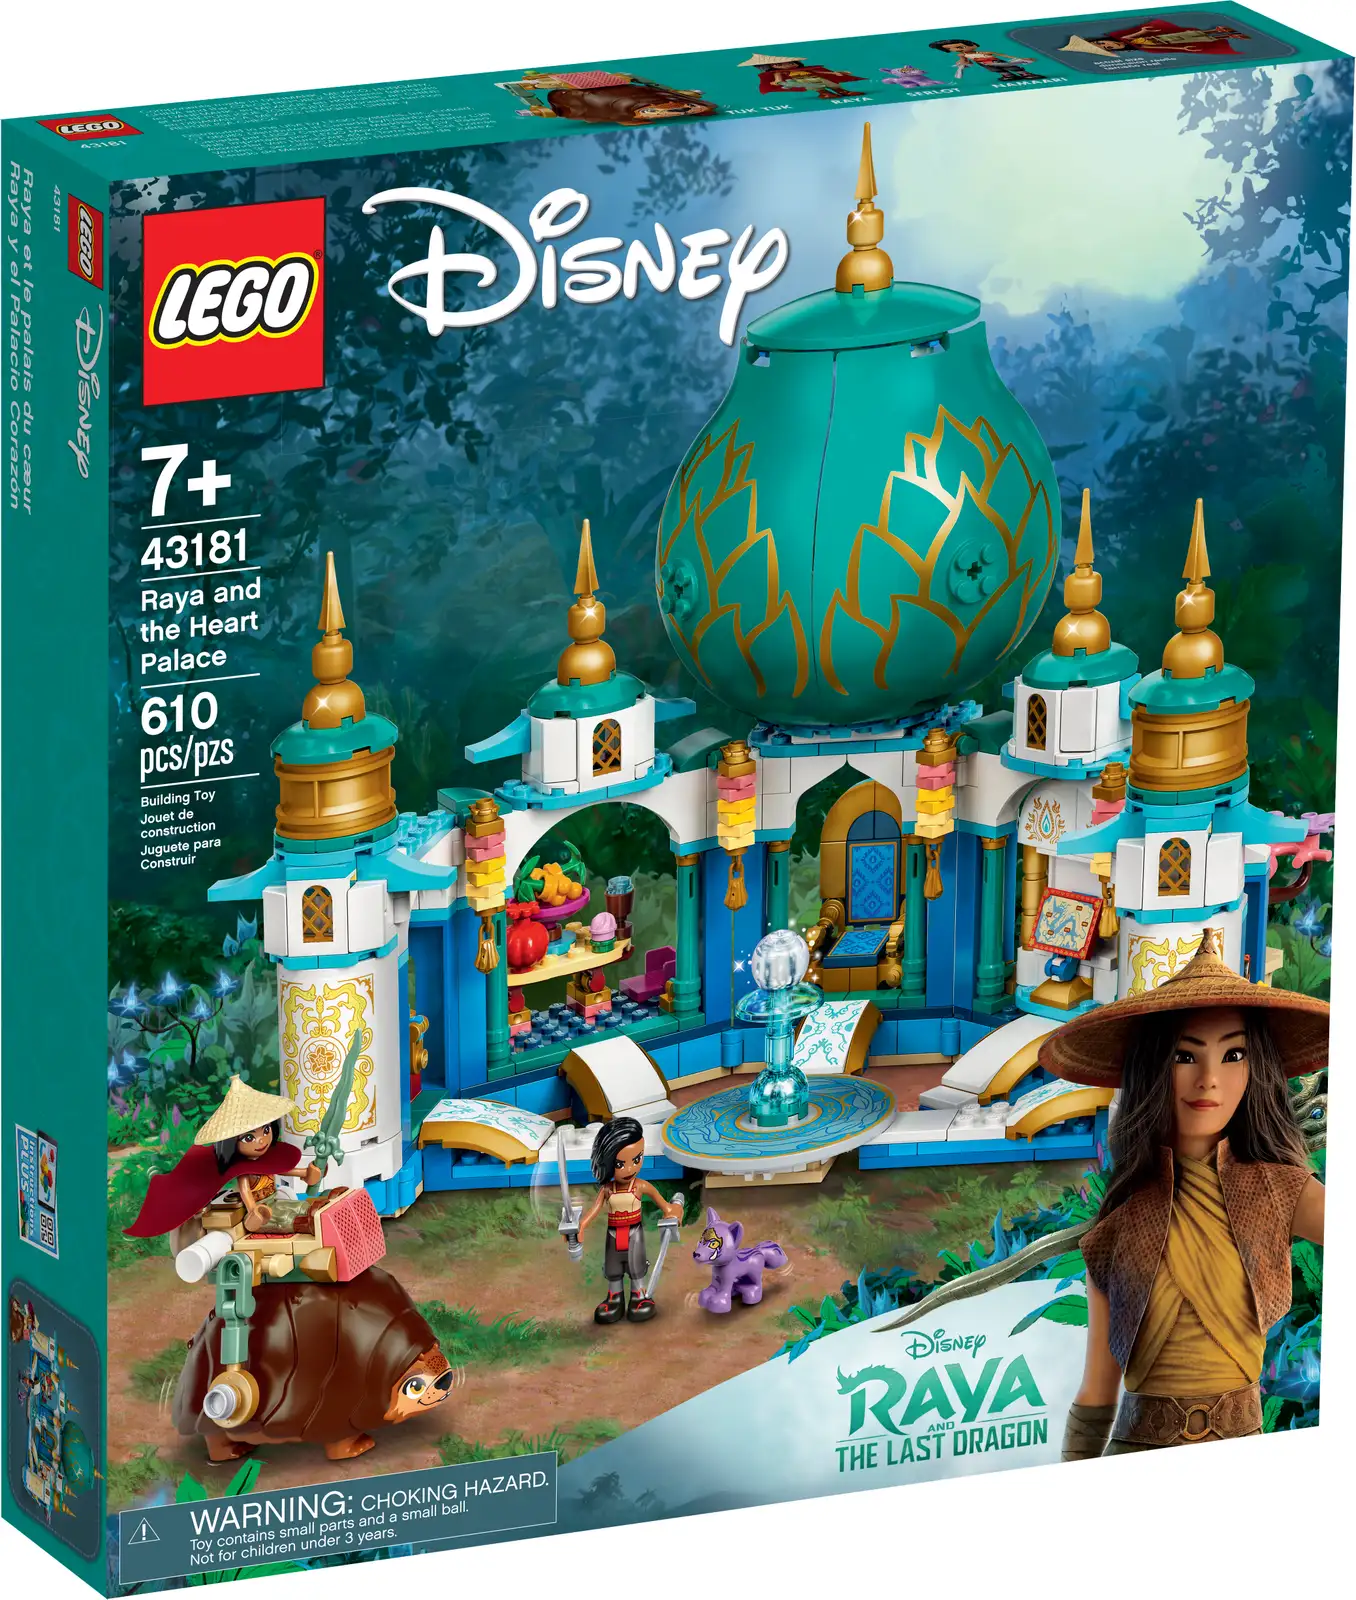 Adventure awaits Disney fans with this LEGO® ǀ Disney Raya and the Heart Palace (43181) set. The set comes with printed building instructions and digital Instructions PLUS! Using the LEGO Building Instructions app, the guided, real-life building process leaves even younger builders feeling like real master builders… awesome! Appealing building details The buildable palace has 6 different rooms to explore, including a throne room, treasure room and a hidden room behind a revolving wall. The 2 side towers open and can hold Raya’s and Namaari’s weapons. The central tower opens to reveal a bedroom, with portraits of Raya’s friends. Exciting adventures Kids can dive into playing with 2 mini-doll figures from Disney’s Raya and the Last Dragon – Raya and Namaari – plus Tuk Tuk and Namaari’s Serlot LEGO figures. The set makes a unique holiday gift and can be combined with LEGO ǀ Disney Raya and Sisu Dragon (43184) to create an ultimate Heart Palace construction toy set for the best role-play fun. Surprise a great kid with this different and unique LEGO® ǀ Disney Raya and the Heart Palace (43181) set. Packed with features and accessories, this fun set inspires imaginative role play. This set, based on the new movie Disney’s Raya and the Last Dragon, has a palace with 6 rooms and 2 towers, Raya and Namaari mini-doll figures, plus Tuk Tuk and Namaari’s Serlot LEGO® figures. The palace has a revolving wall with a secret room, a large treasure chest and opening central and side towers. Combine with the LEGO® ǀ Disney Raya and Sisu Dragon (43184) set for a real wow factor. Disney’s Raya and the Last Dragon fans will adore this buildable toy with its details and fun accessories. The functions and story starters help make this a great on-trend gift for children aged 7+. A buildable toy model full of details. The palace measures over 9.5 in. (24 cm) high, 11 in. (28 cm) wide and 6 in. (16 cm) deep and is designed to be built and played with alone or with friends. The set is great for play and will look good on display. Kids can build the set, take a picture and then share their very first LEGO® ǀ Disney Raya and the Last Dragon Heart Palace with friends! Printed building instructions are great, but digital Instructions PLUS are AWESOME! Using the LEGO® Building Instructions app, even younger builders can zoom in on and visualize models as they build. Immerse kids in the fantasy and adventure of Disney’s Raya and the Last Dragon with this creative LEGO® ǀ Disney set. Children can play out exciting adventures with Disney’s Raya and her friends! LEGO® components meet stringent industry standards to ensure they are consistent, compatible and connect and pull apart reliably every time – it’s been that way since 1958. LEGO® components are dropped, heated, crushed, twisted and analyzed to make sure they meet strict global safety standards.